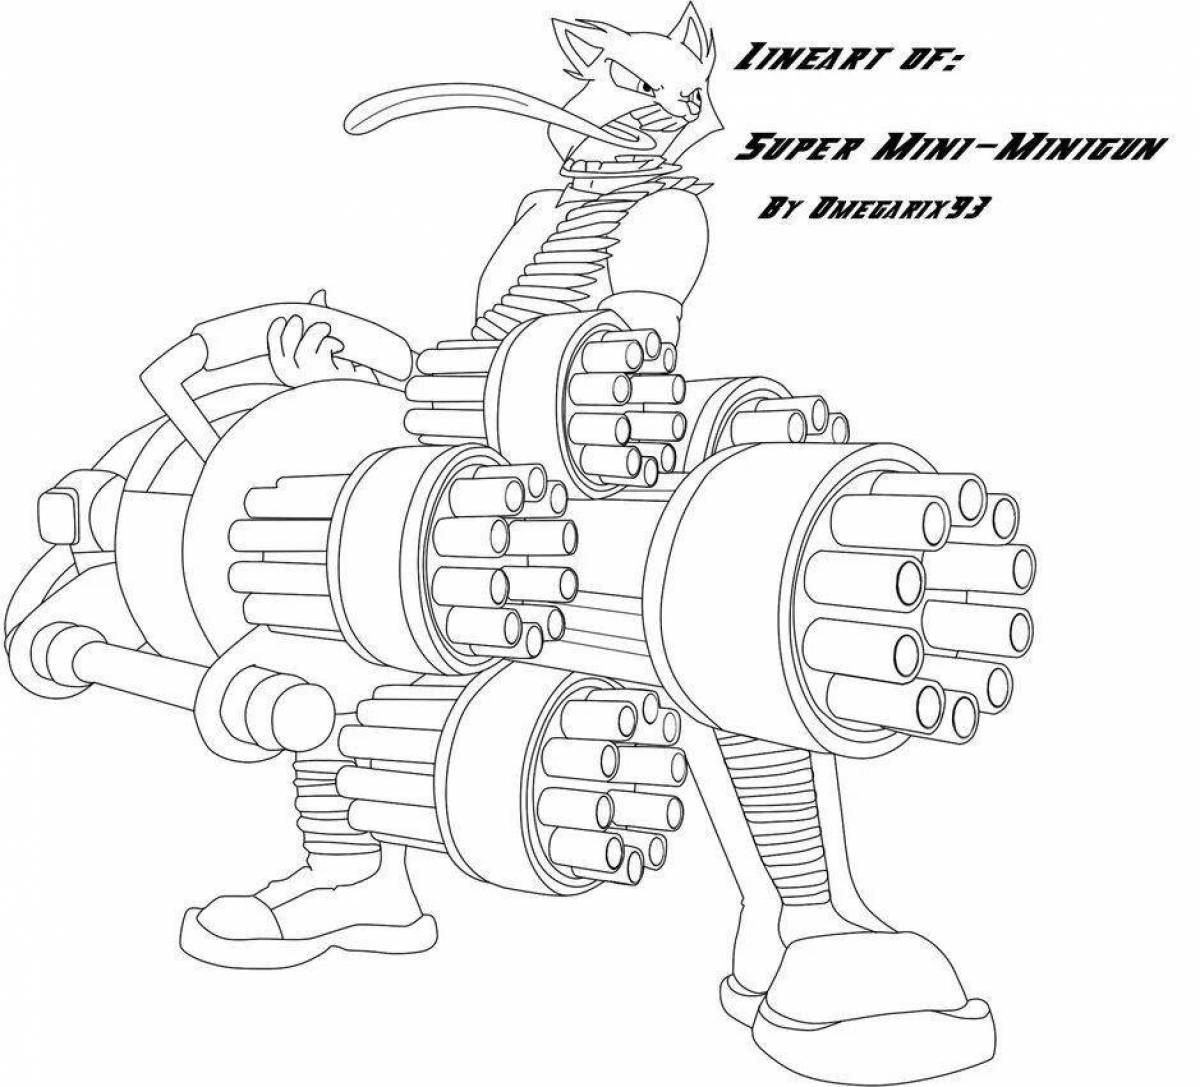 Awesome minigun coloring page